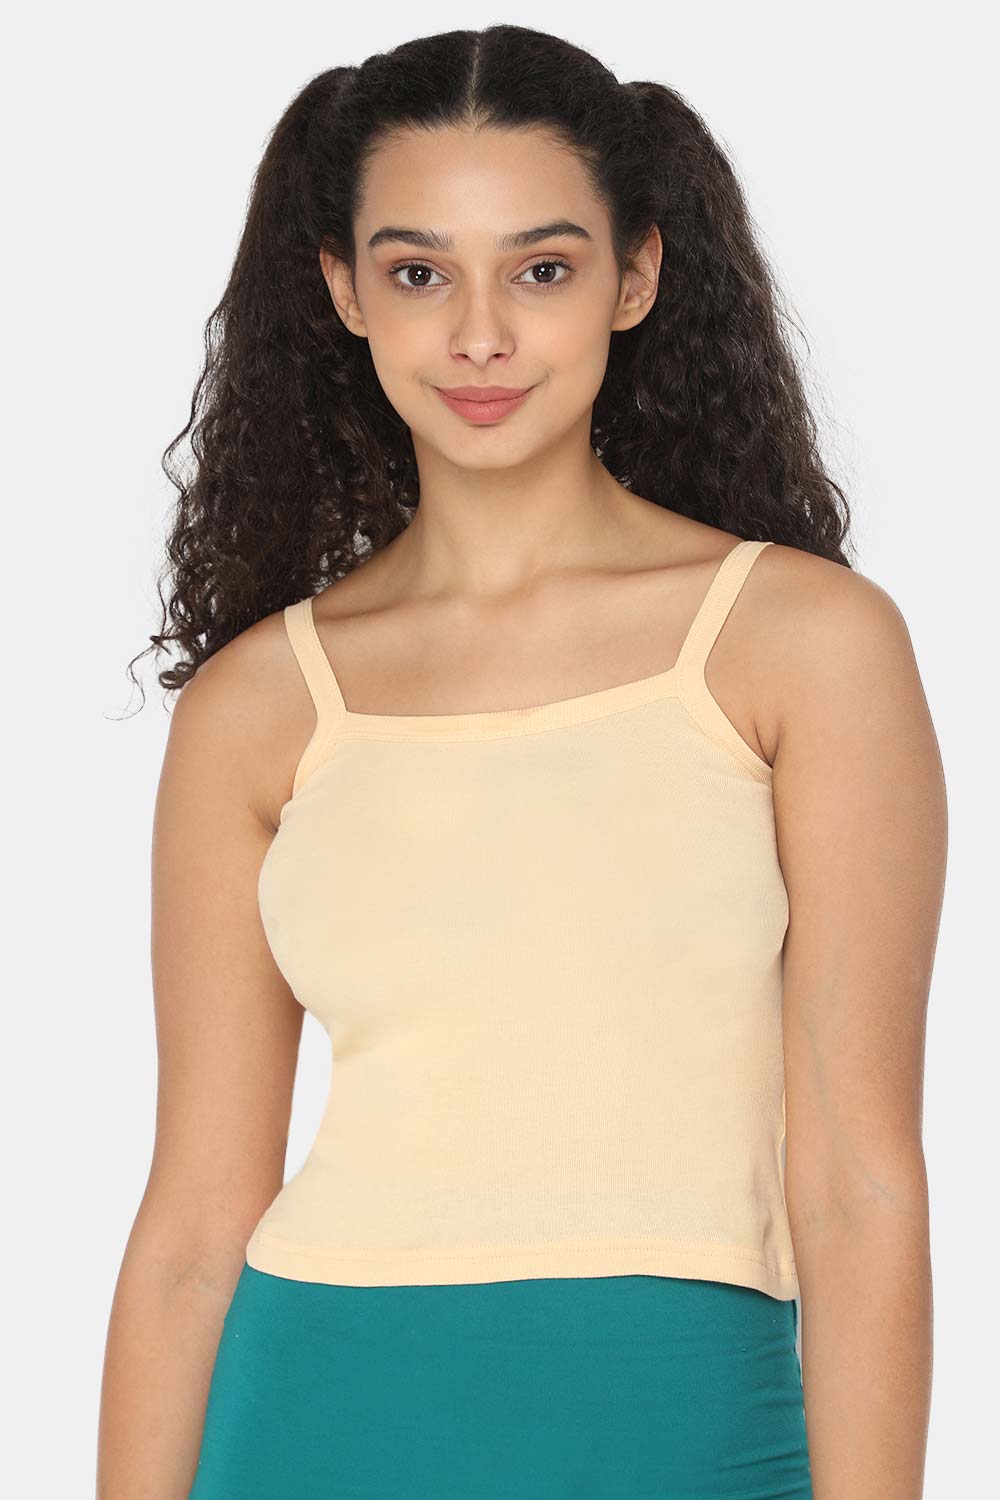 Intimacy Camisole-Slip Special Combo Pack - In01 - Pack of 3 - C52